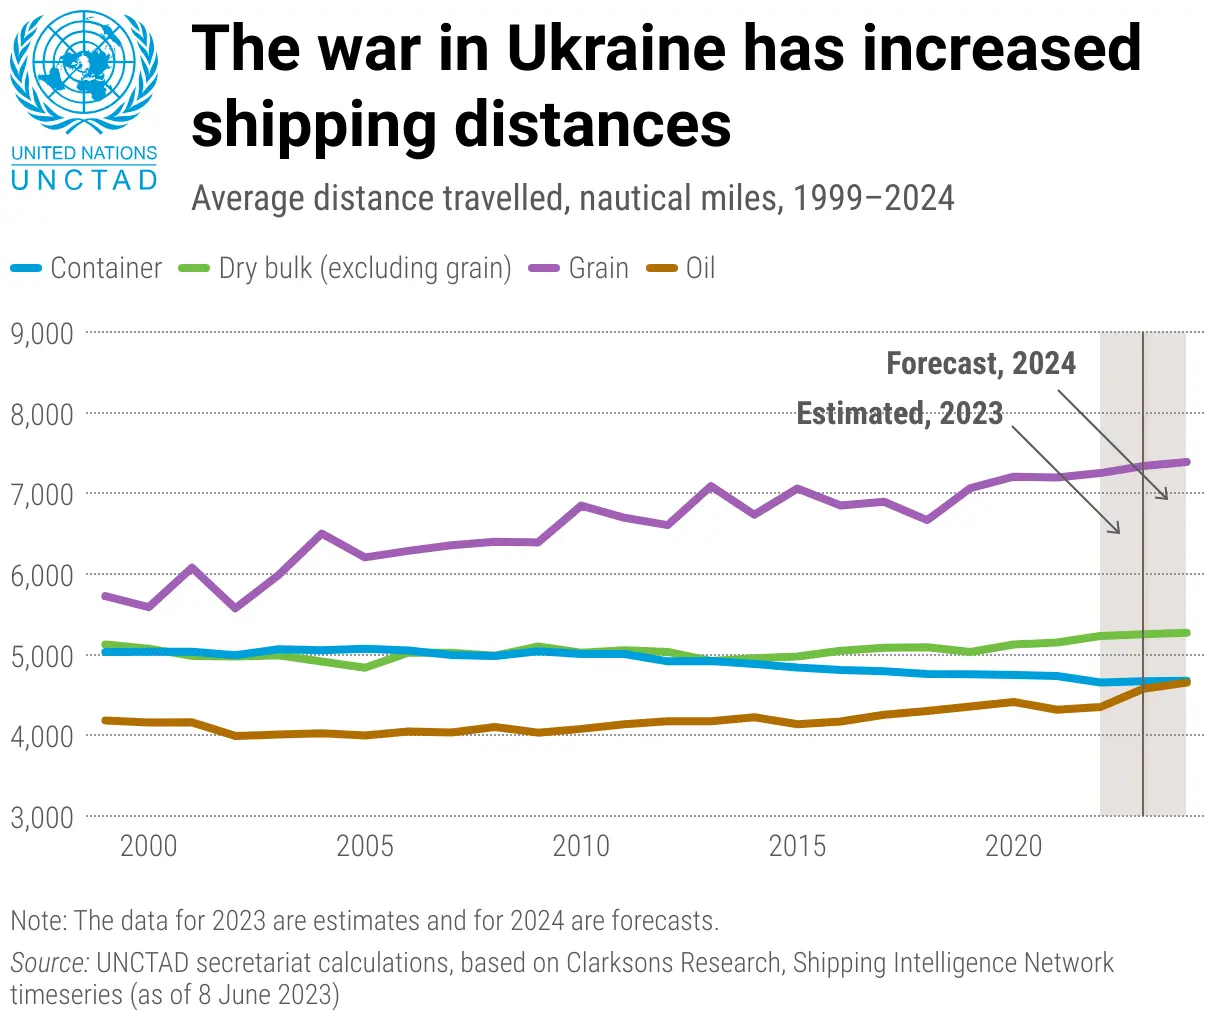 The war in Ukraine has increased shipping distances